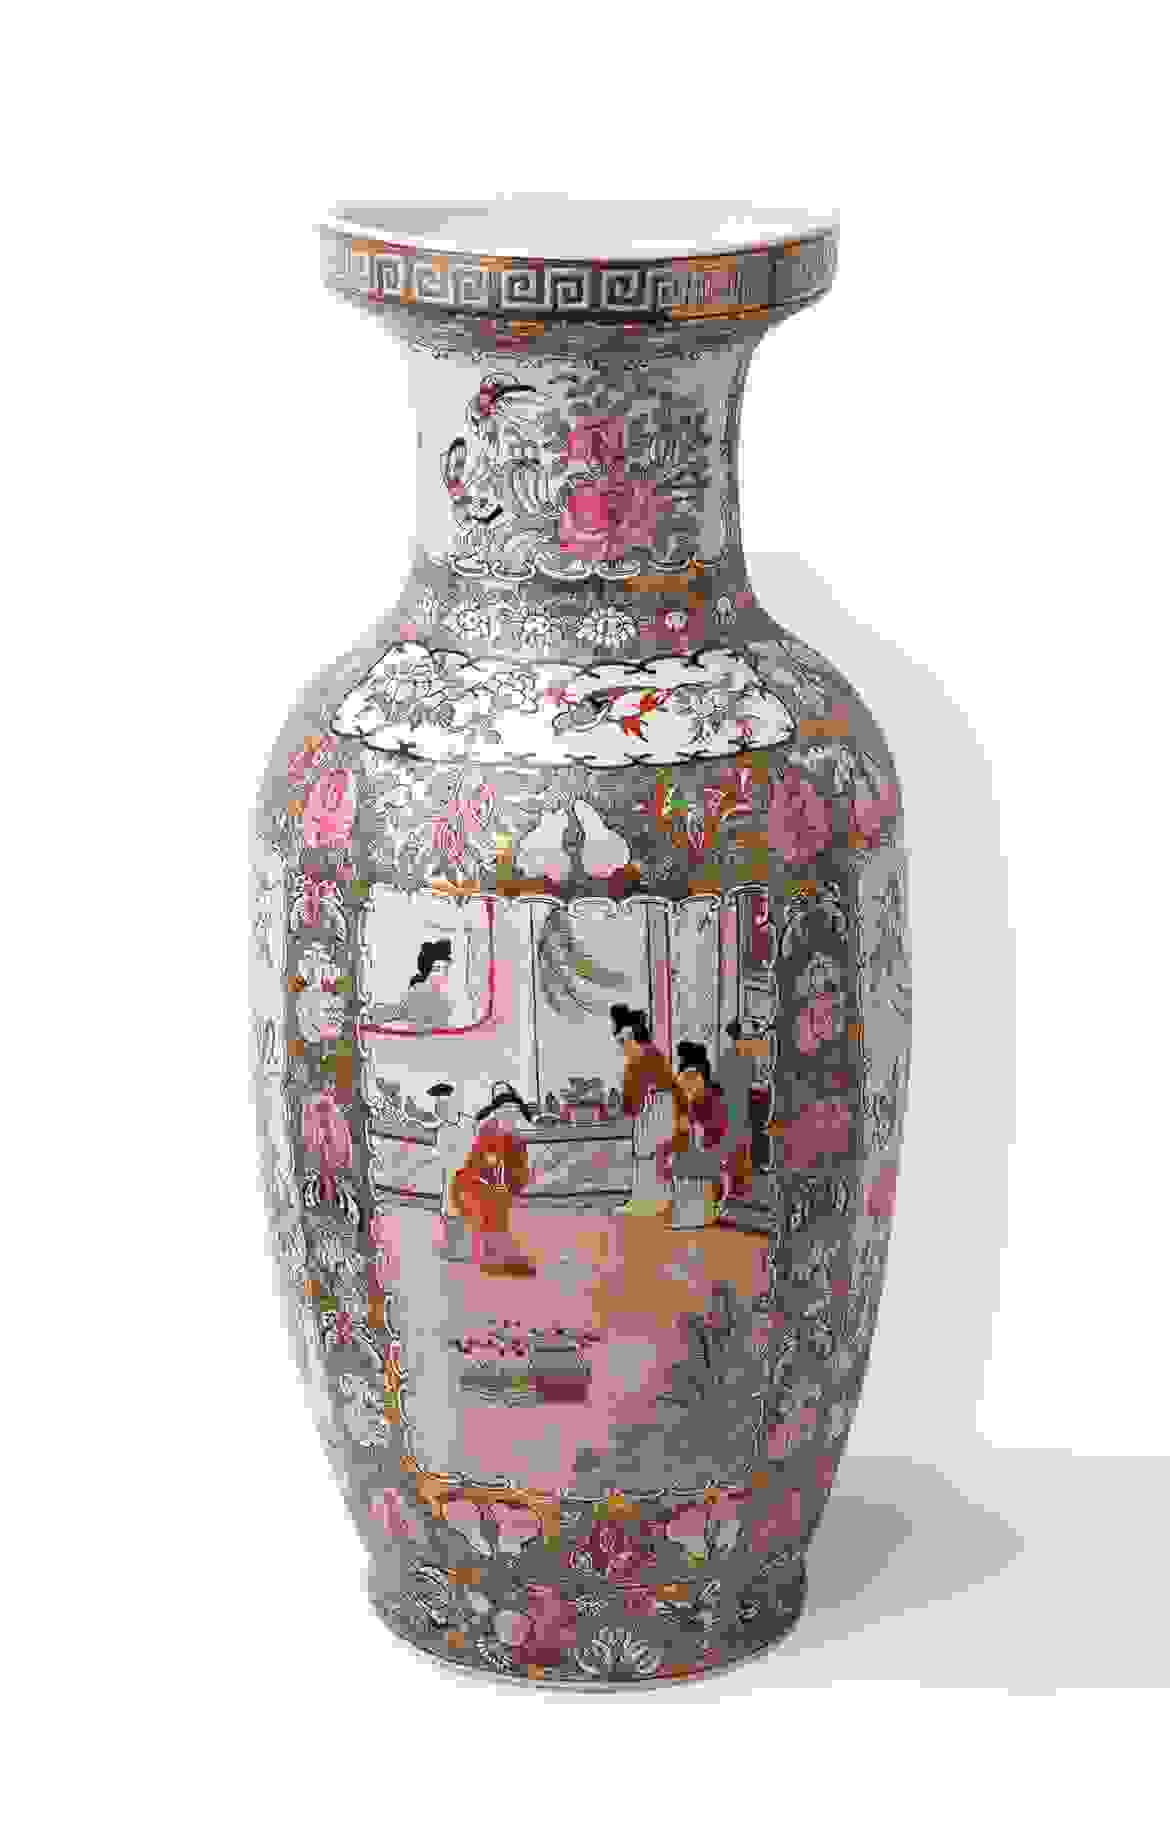 Intricate work of art on the vase